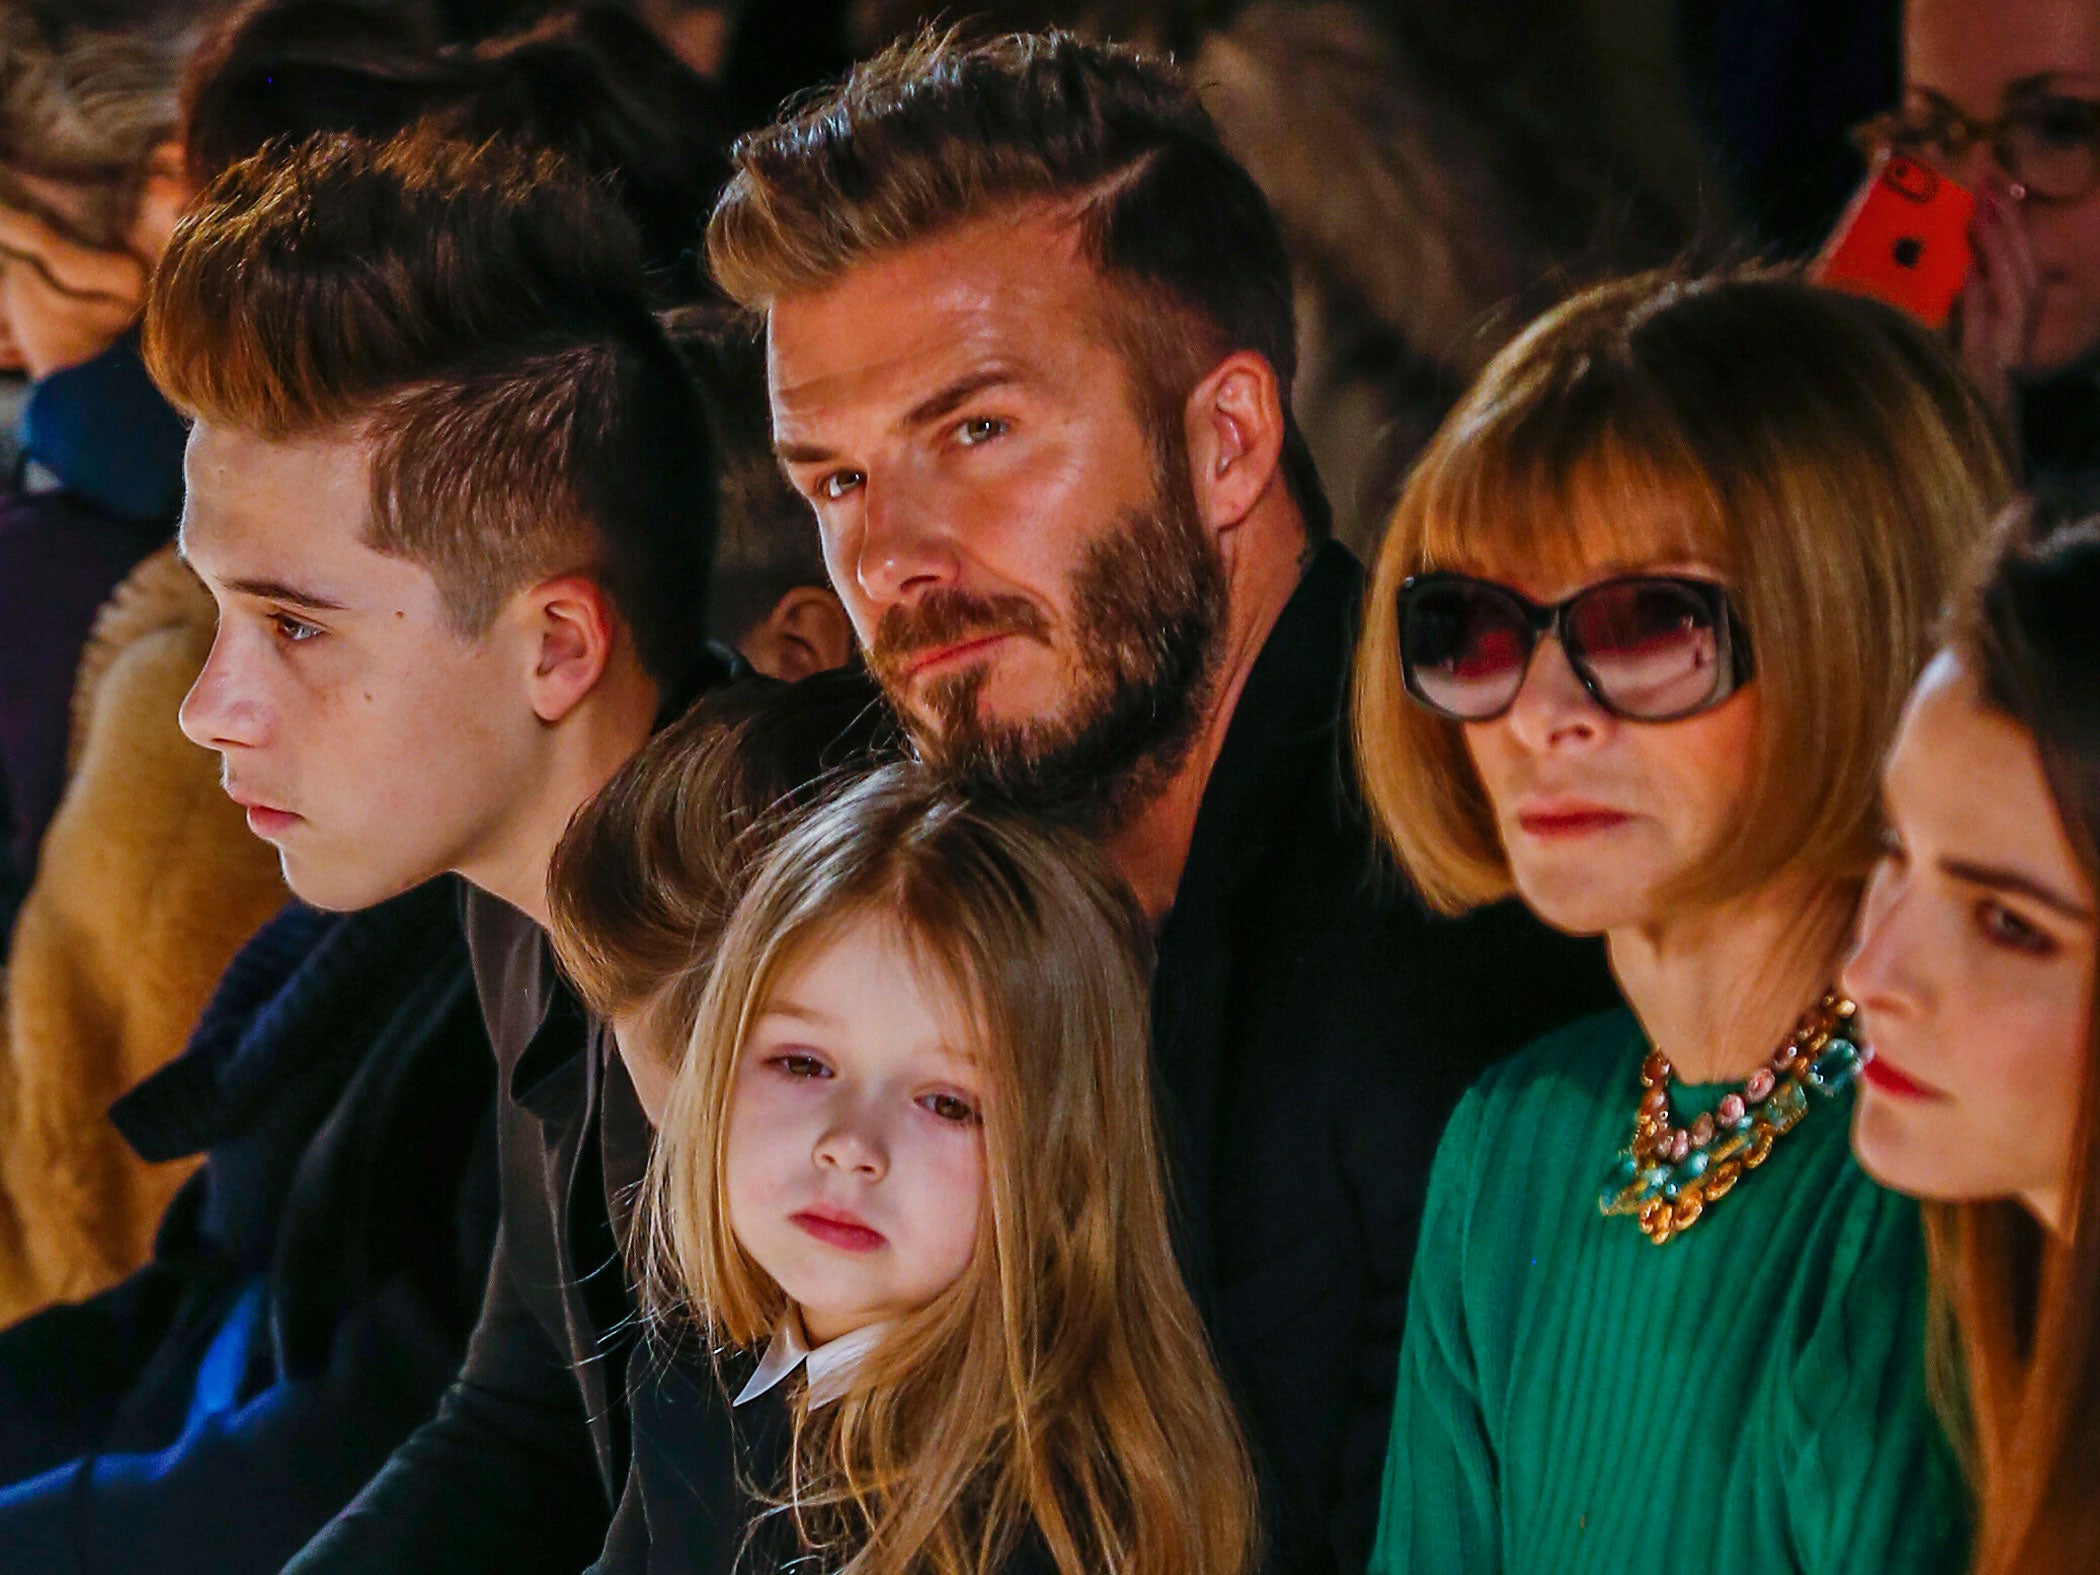 Former England captain David Beckham sits next to U.S. Vogue editor Anna Wintour (2nd R) with his daughter, Harper, on his lap and son Brooklyn (L) during a presentation of the Victoria Beckham Fall/Winter 2015 collection during New York Fashion Week Febr